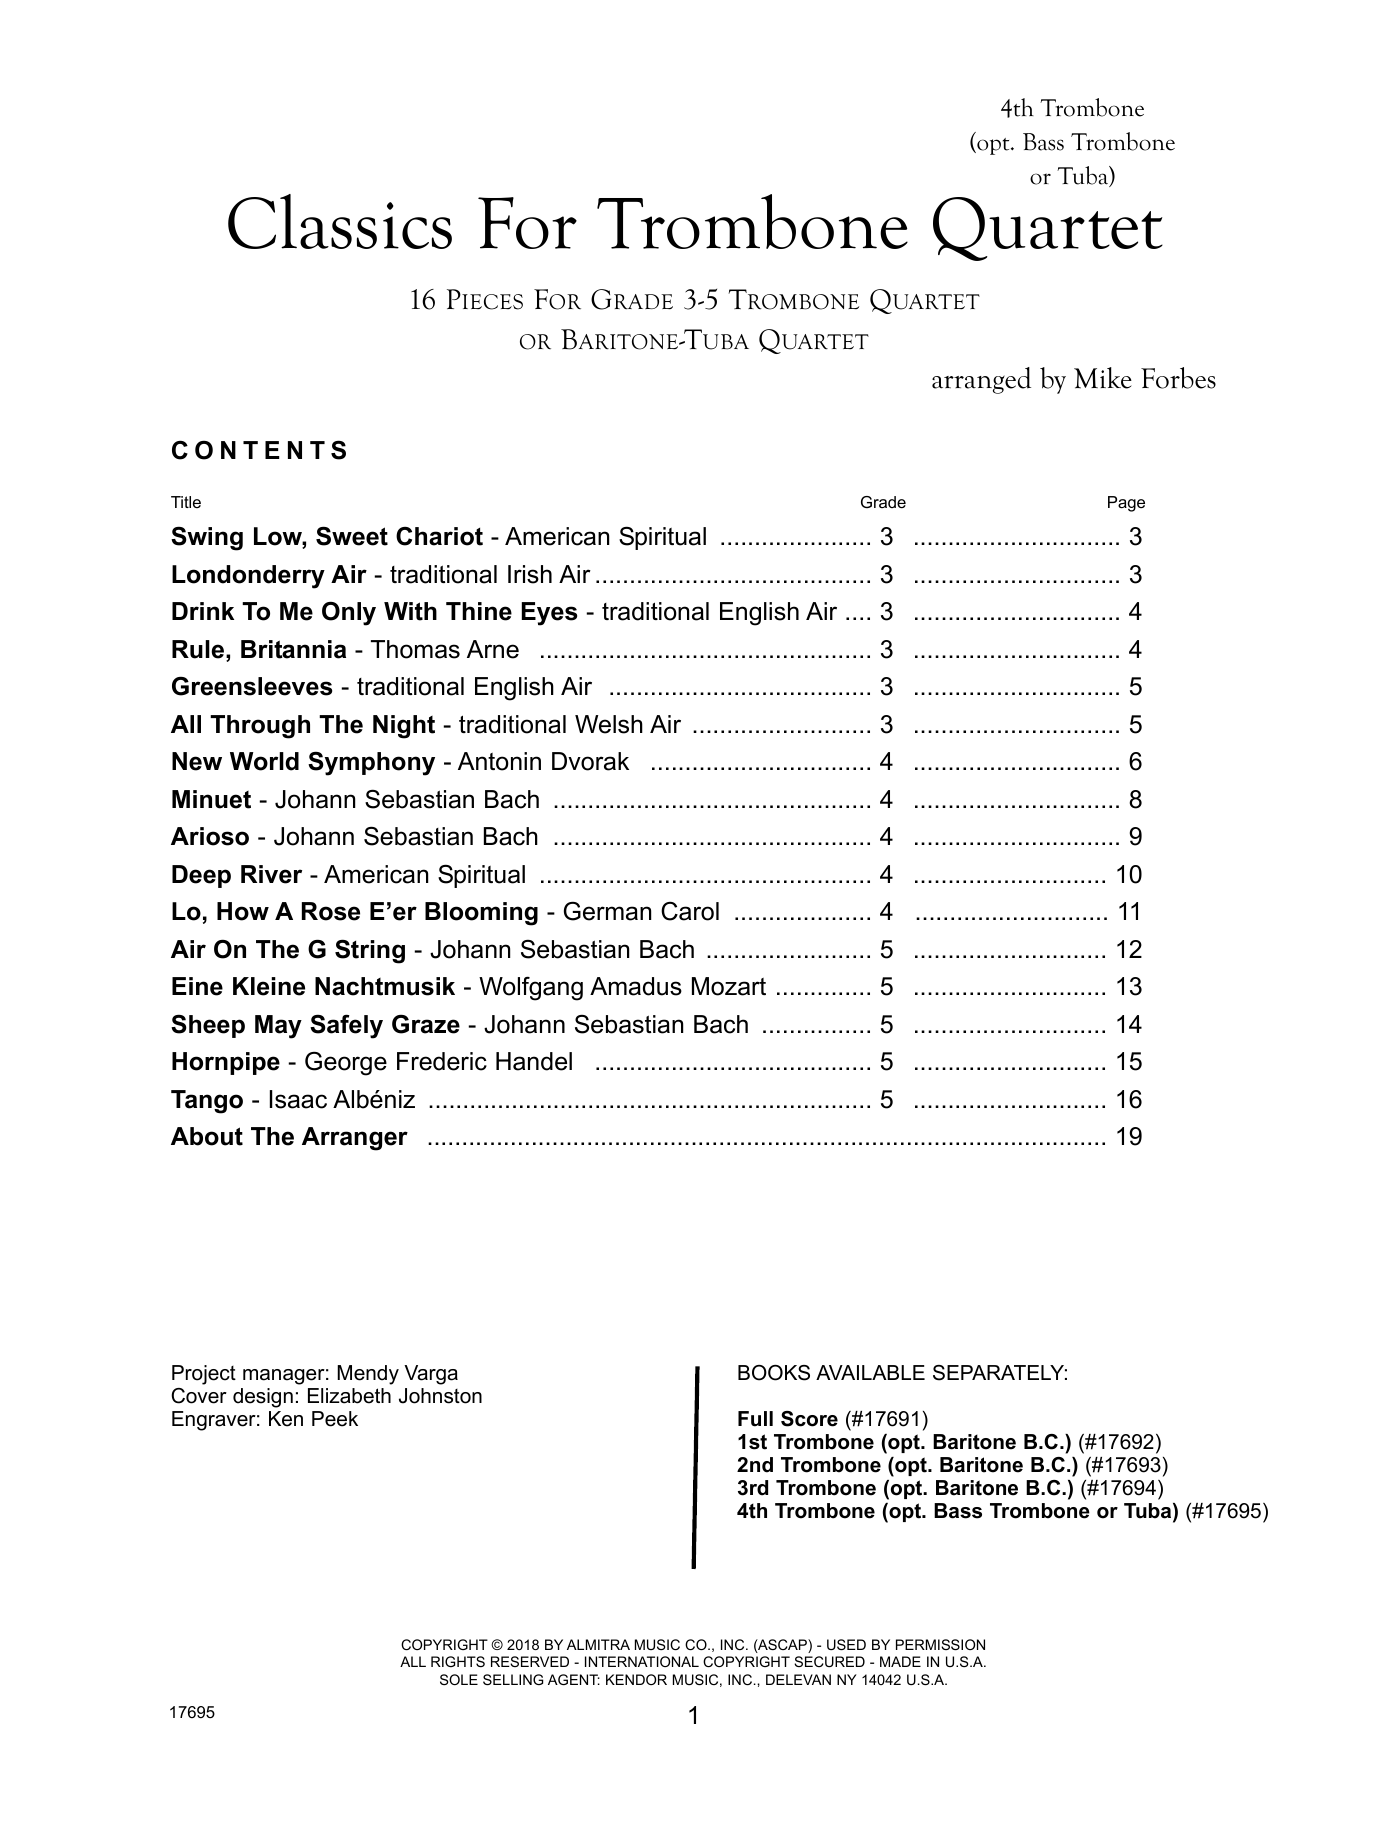 Download Mike Forbes Classics For Trombone Quartet - 4th Tro Sheet Music